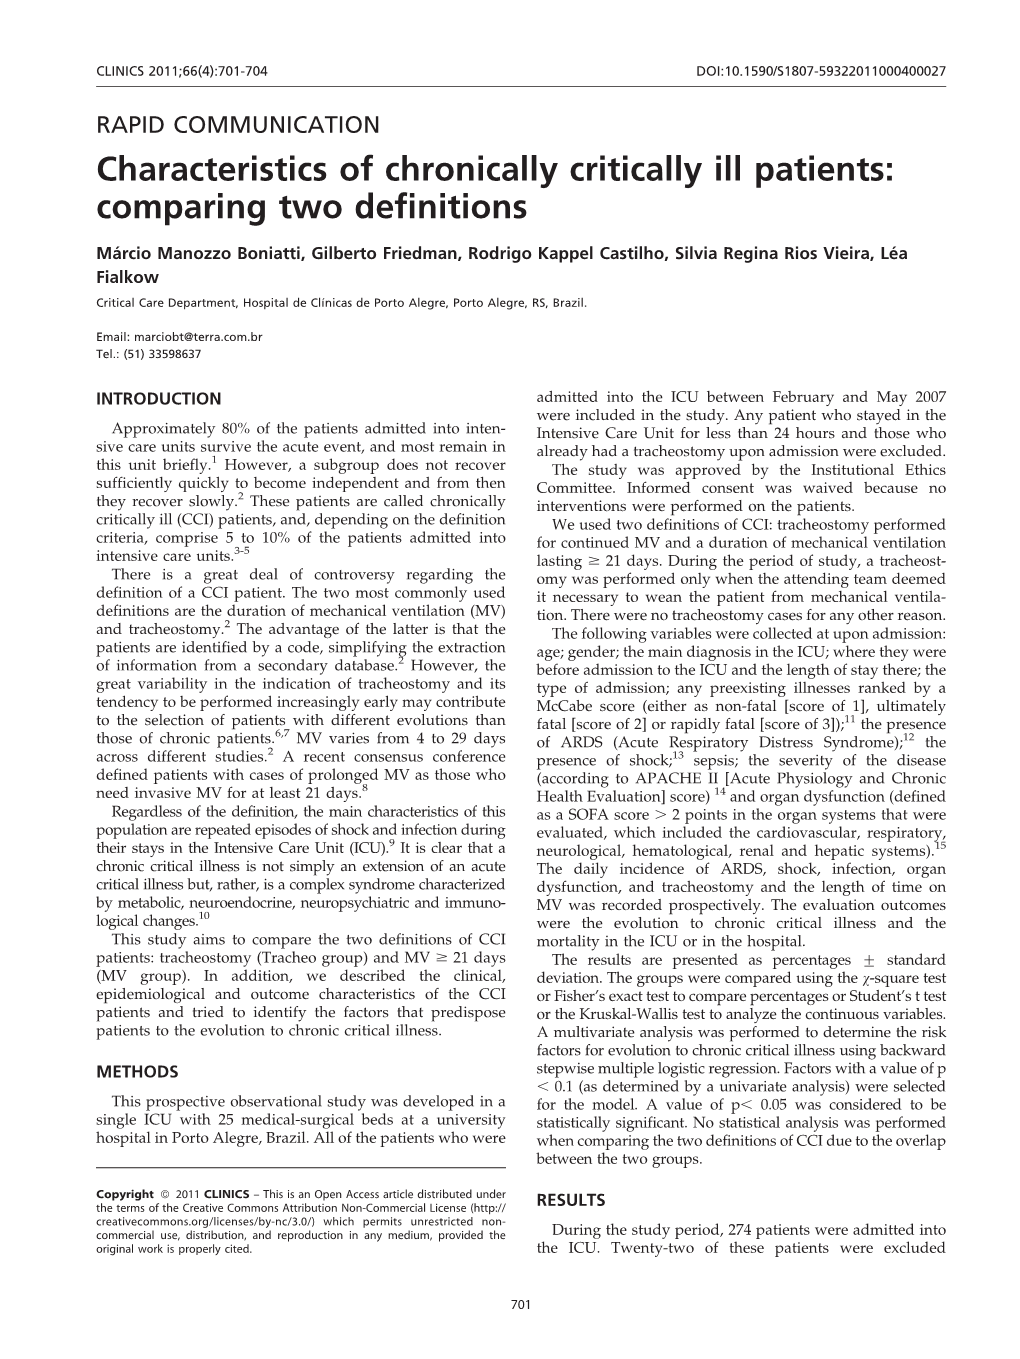 Characteristics of Chronically Critically Ill Patients: Comparing Two Definitions